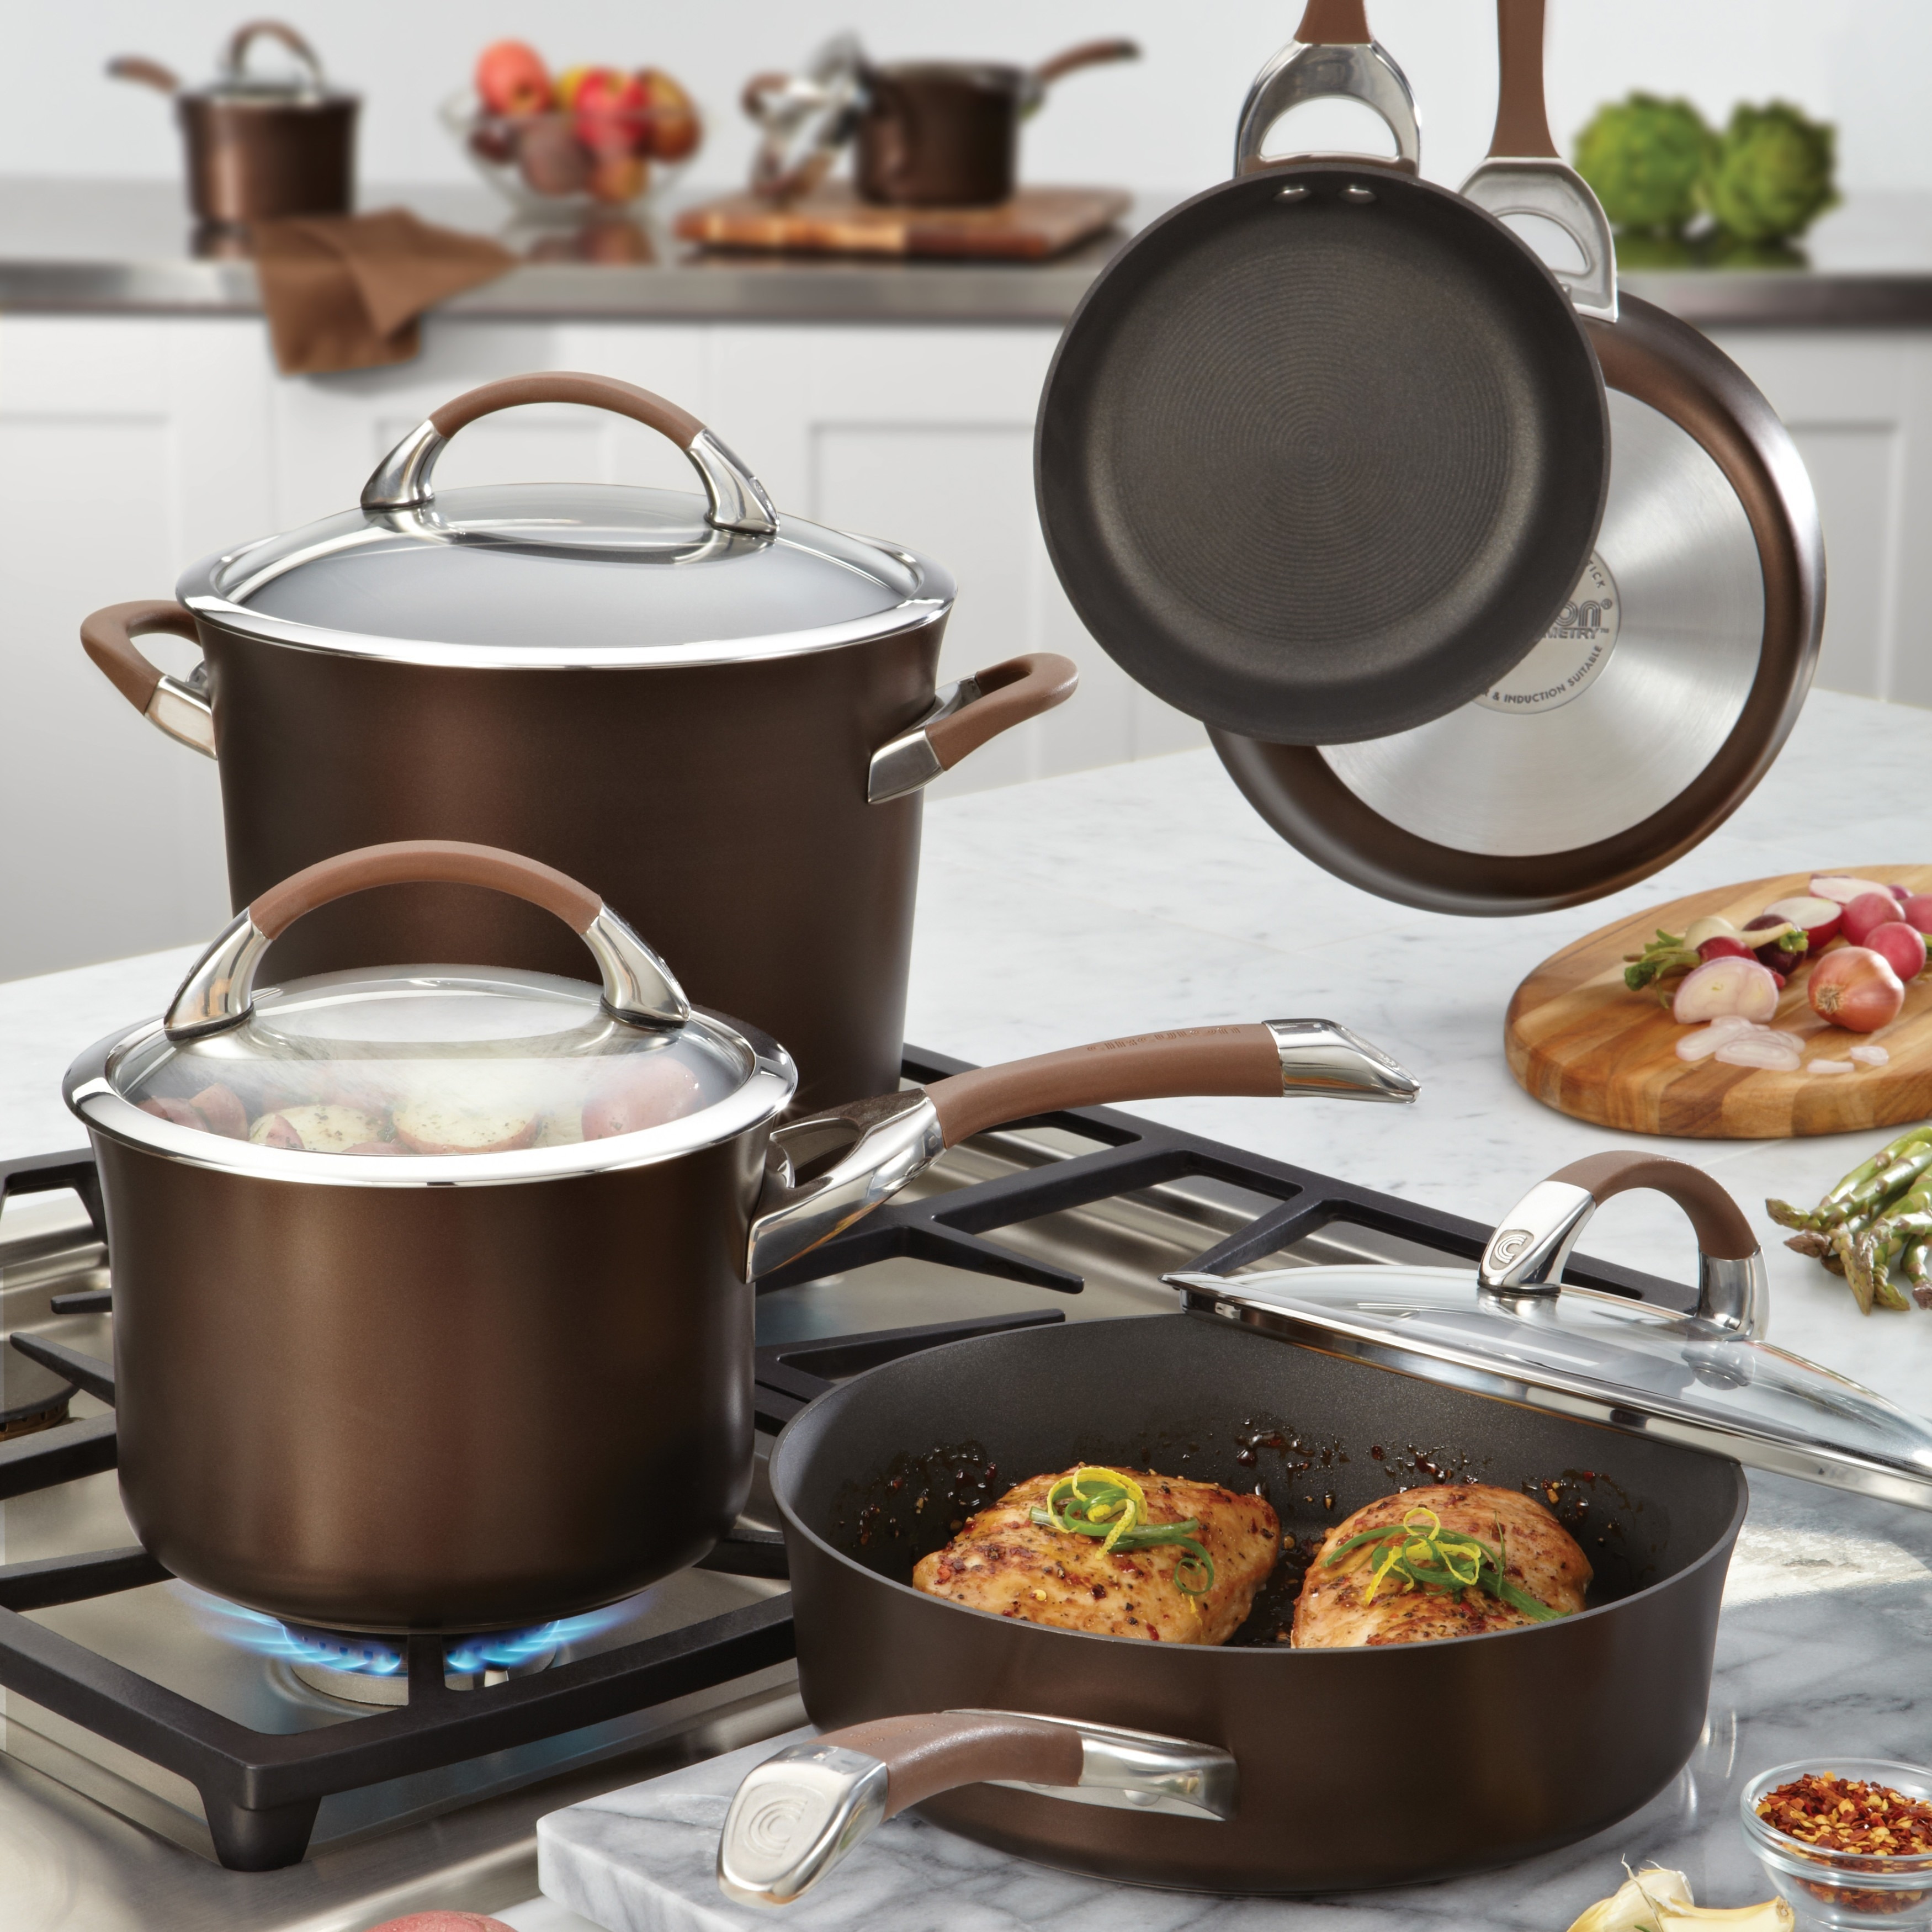 Circulon Symmetry Chocolate Hard-anodized Nonstick 11-piece Cookware Set  (As Is Item) - Bed Bath & Beyond - 31441456